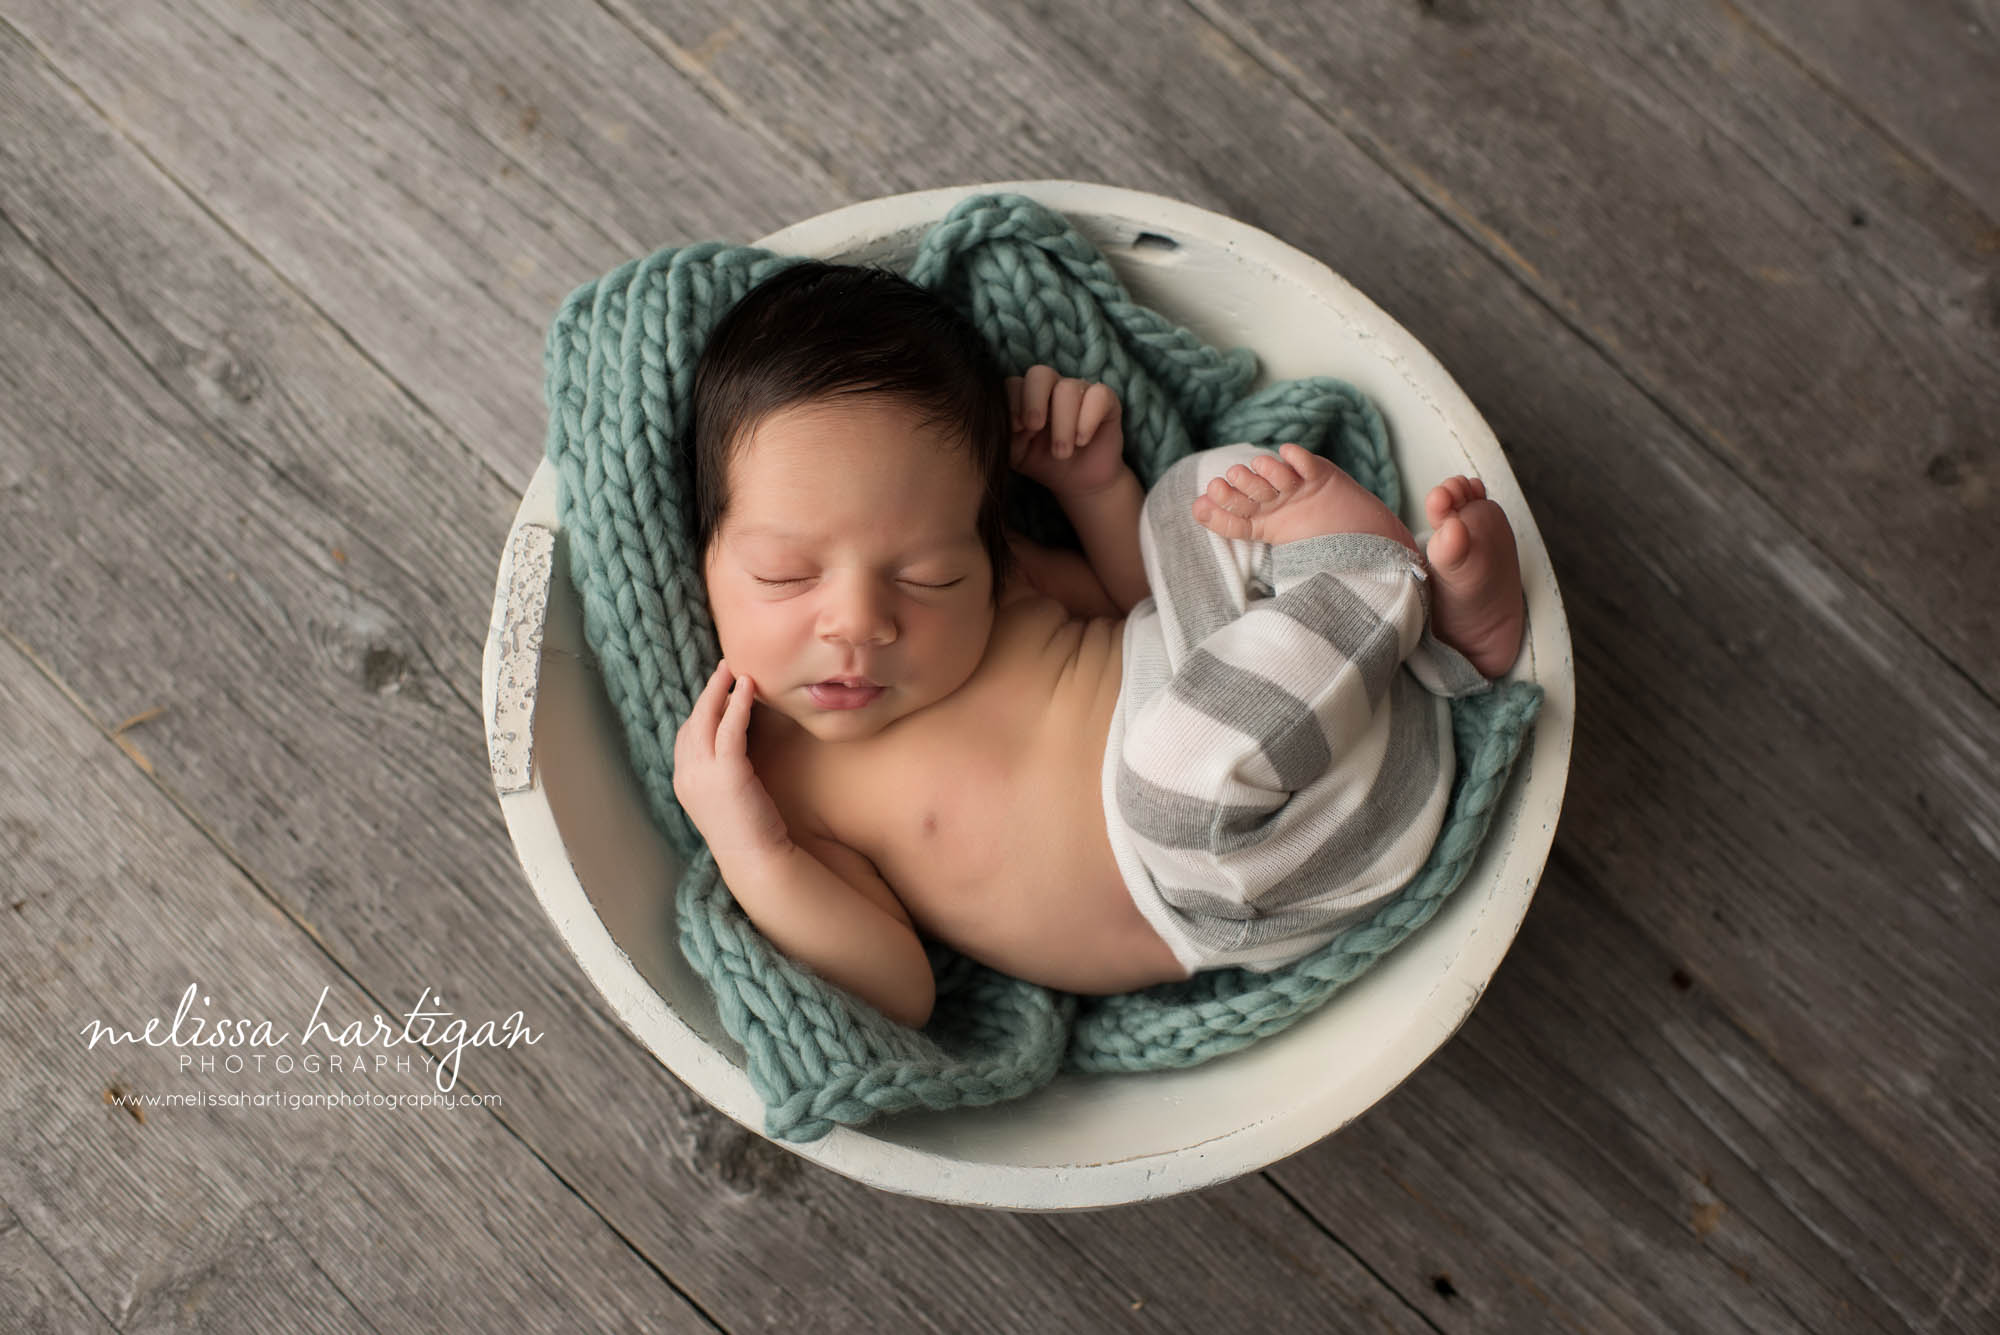 Melissa Hartigan Photography CT Newborn Photographer East Hartford baby boy sleeping in wooden white bowl on a teal knit blanket wearing gray and white striped pants